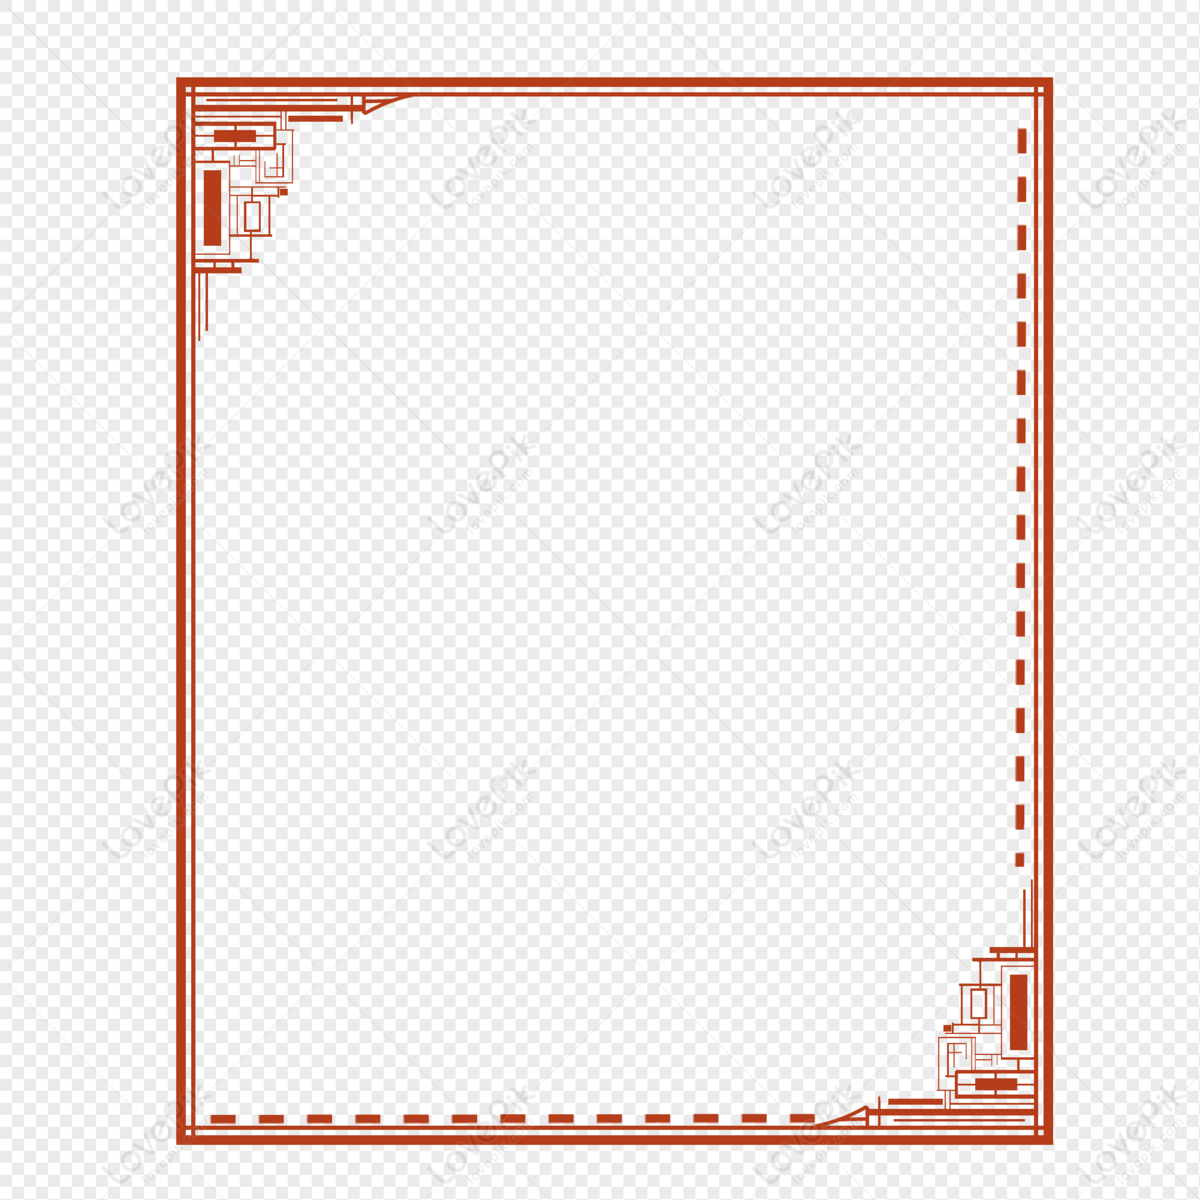 Traditional Borders White Transparent, Square Traditional Border